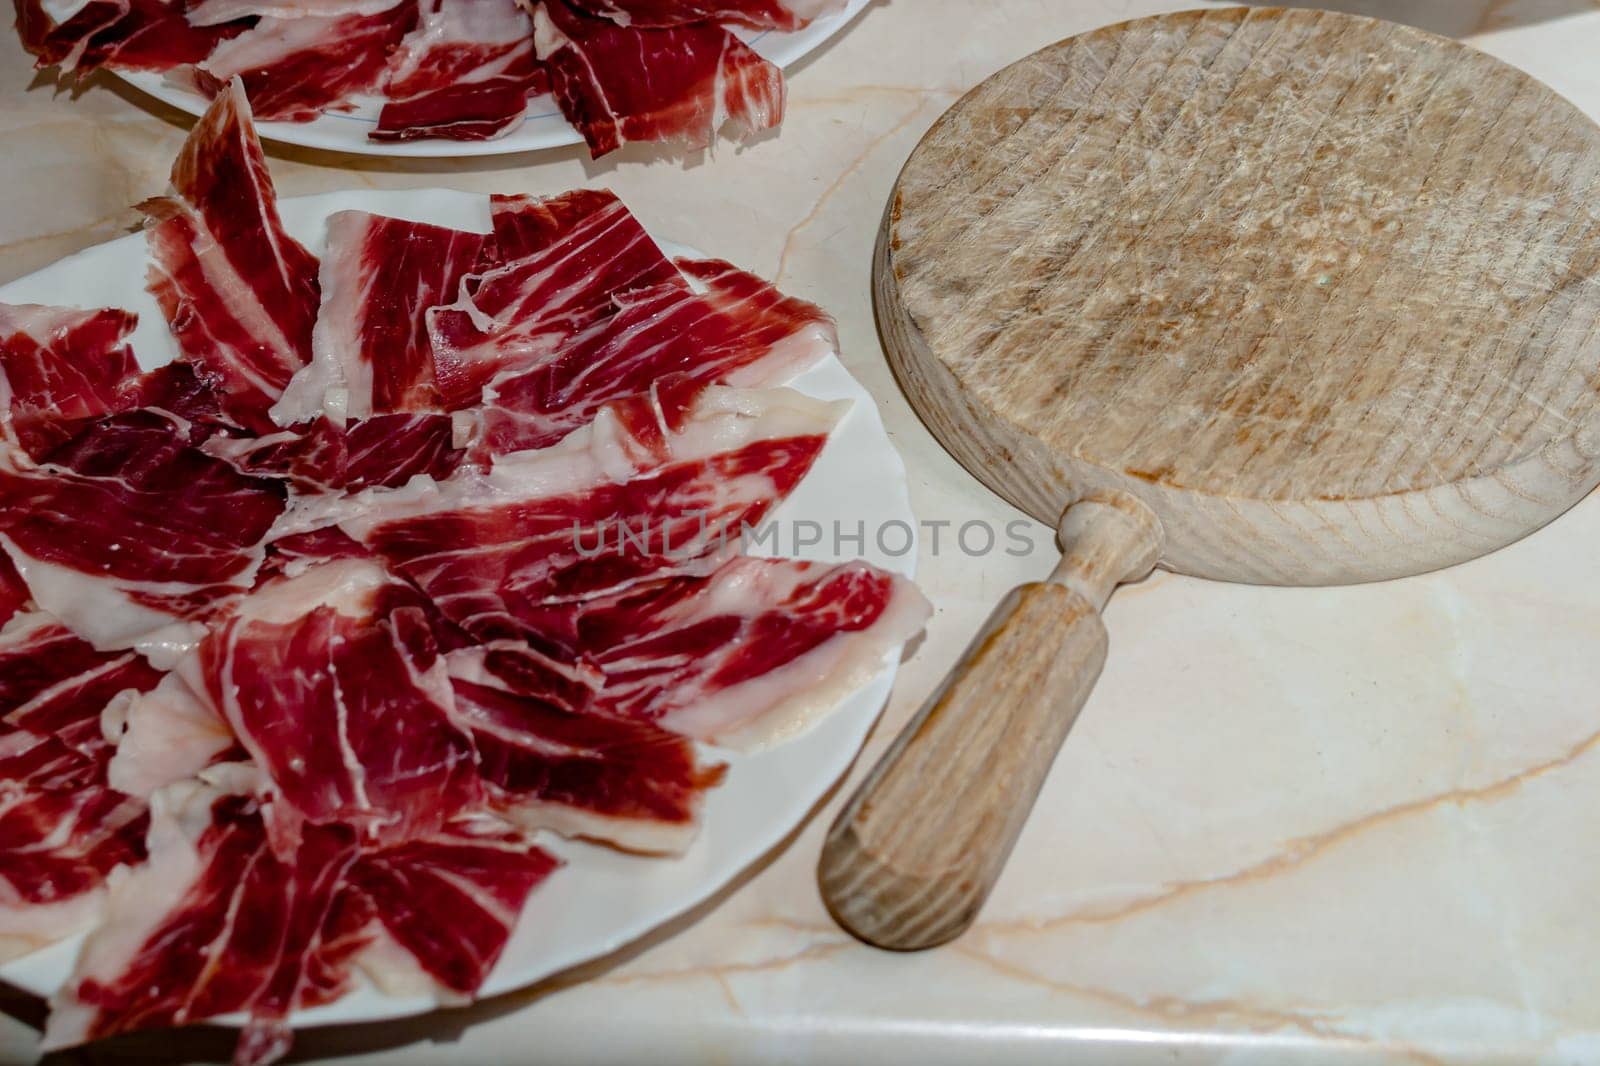 Composition of a plate of Smoked Spanish Ham